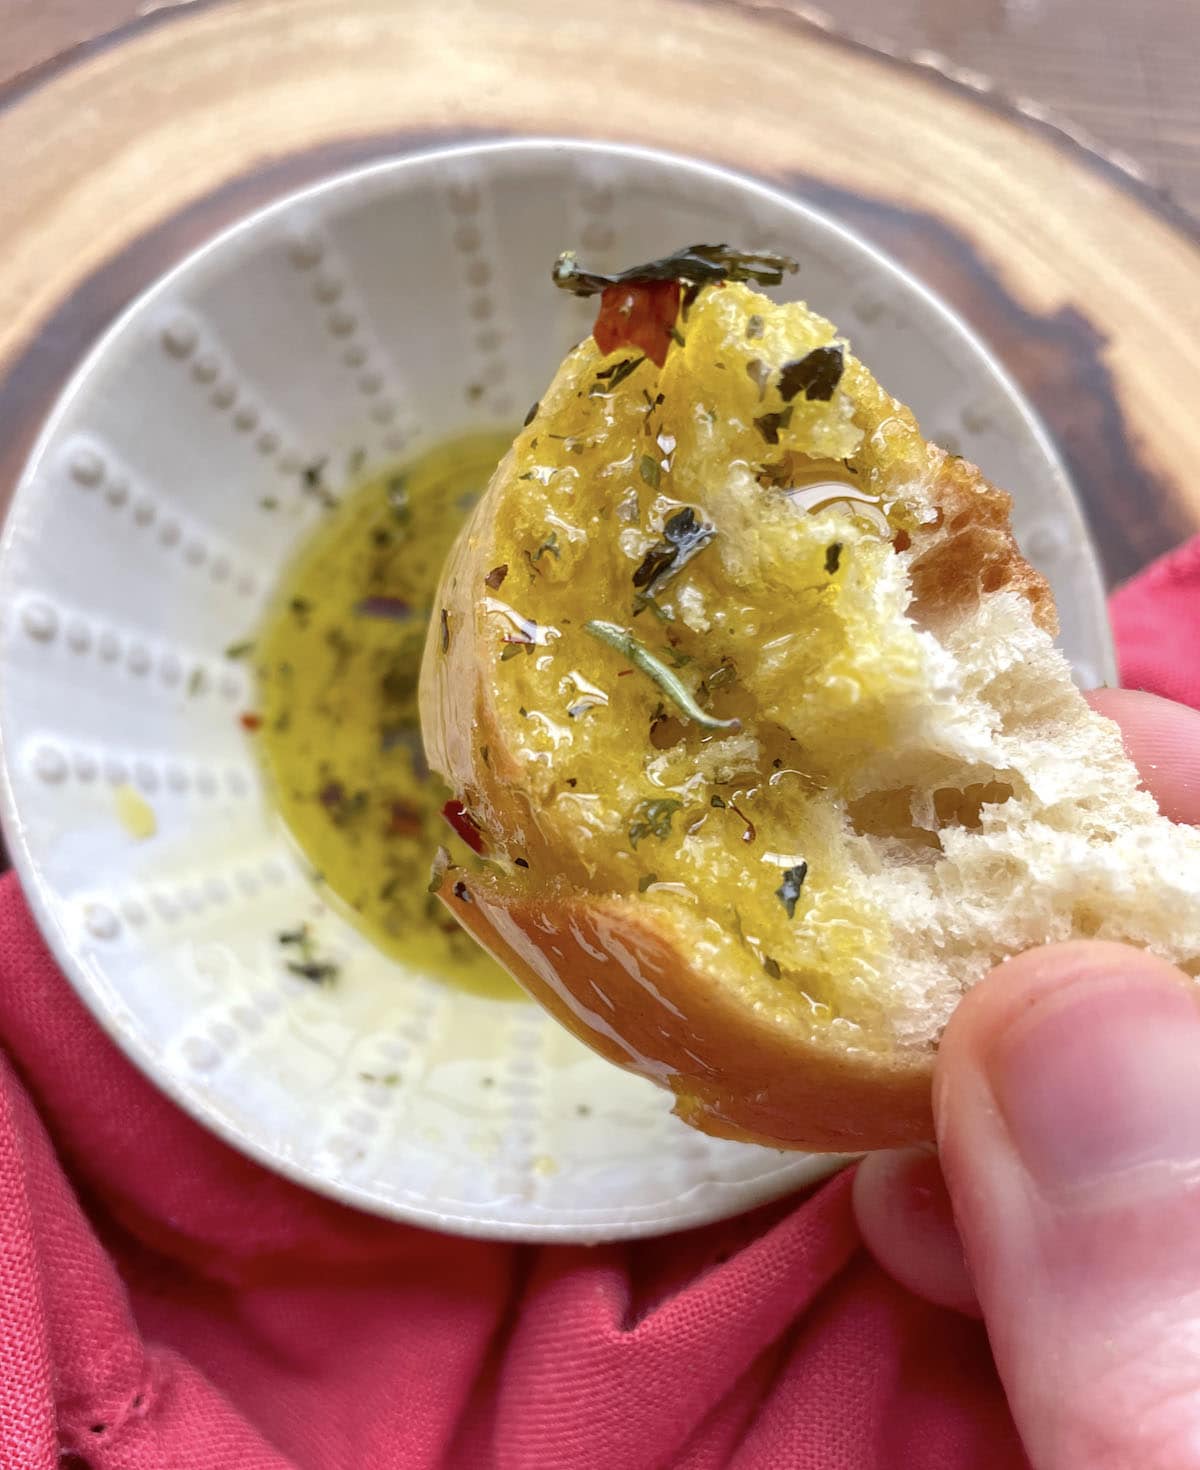 A piece of bread dunked in oil with Italian seasoning in it.